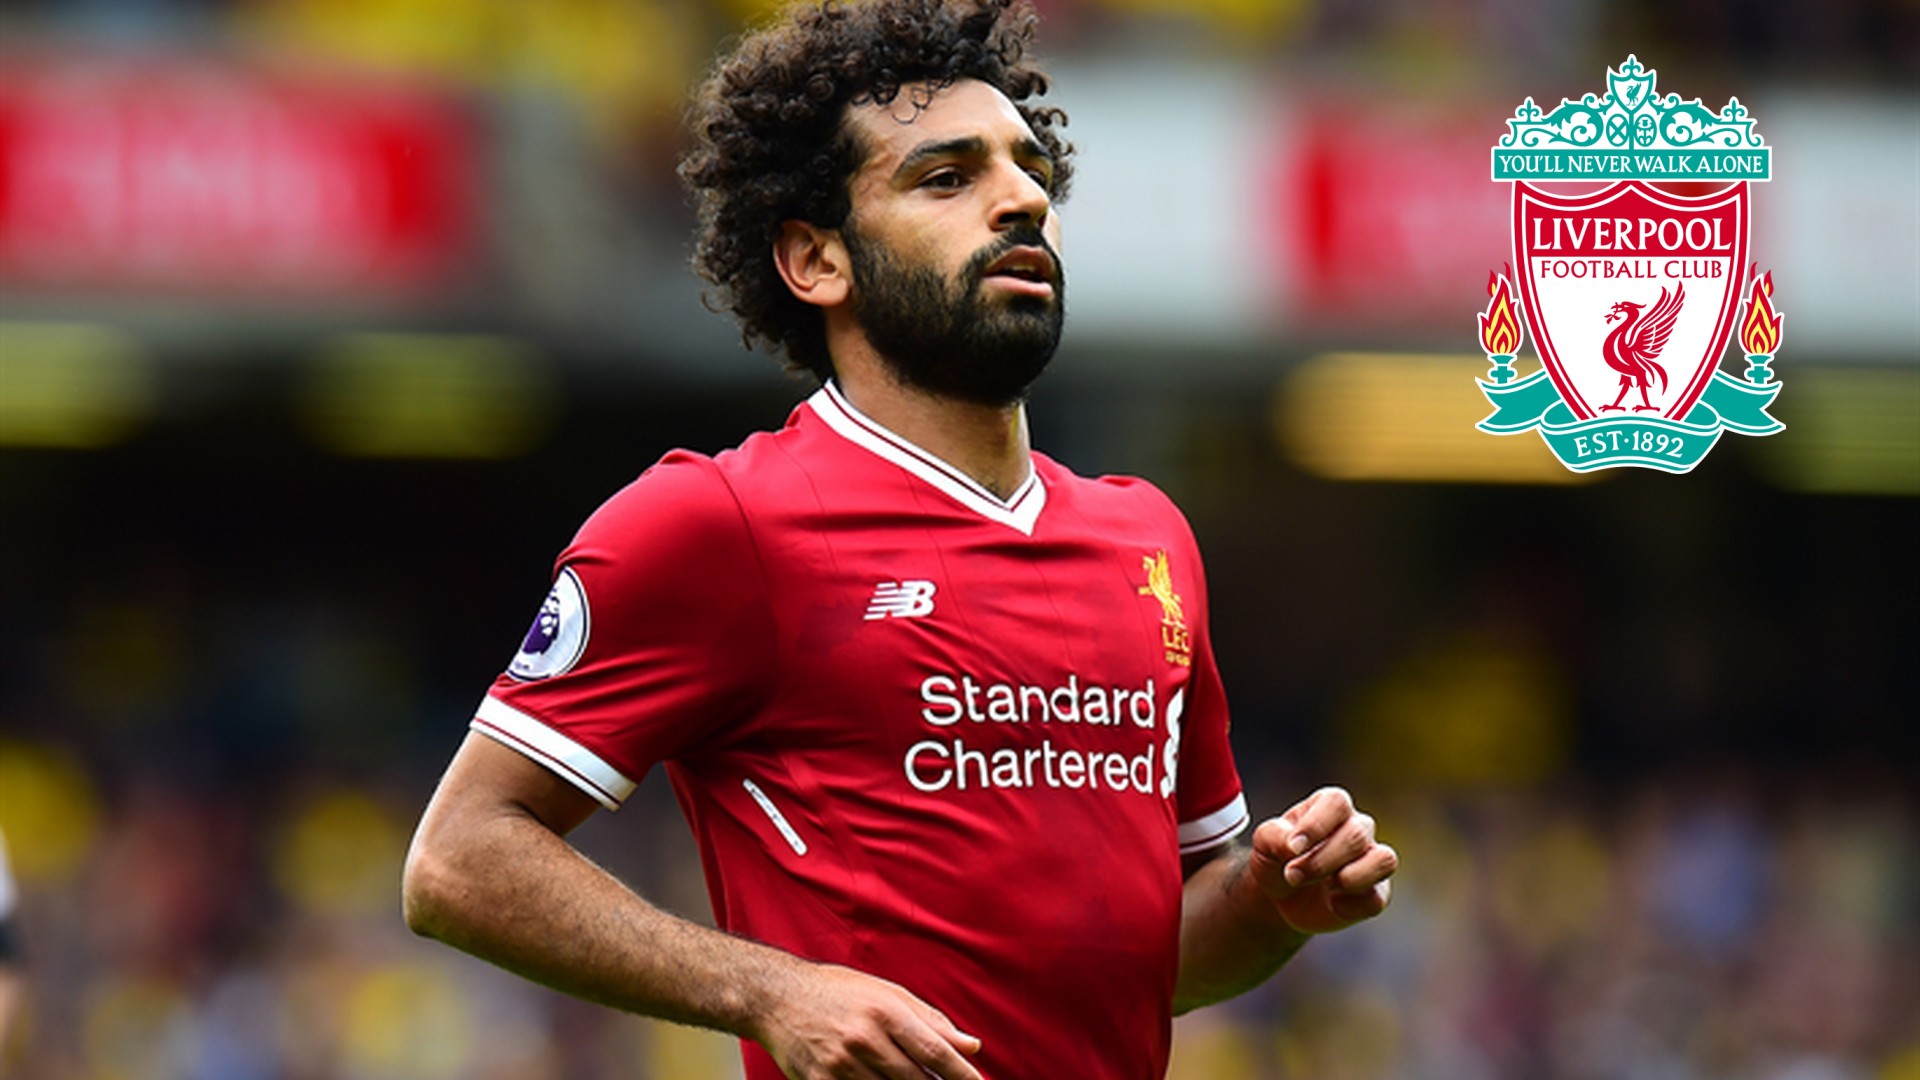 Wallpaper HD Liverpool Mohamed Salah with image resolution 1920x1080 pixel. You can make this wallpaper for your Desktop Computer Backgrounds, Mac Wallpapers, Android Lock screen or iPhone Screensavers